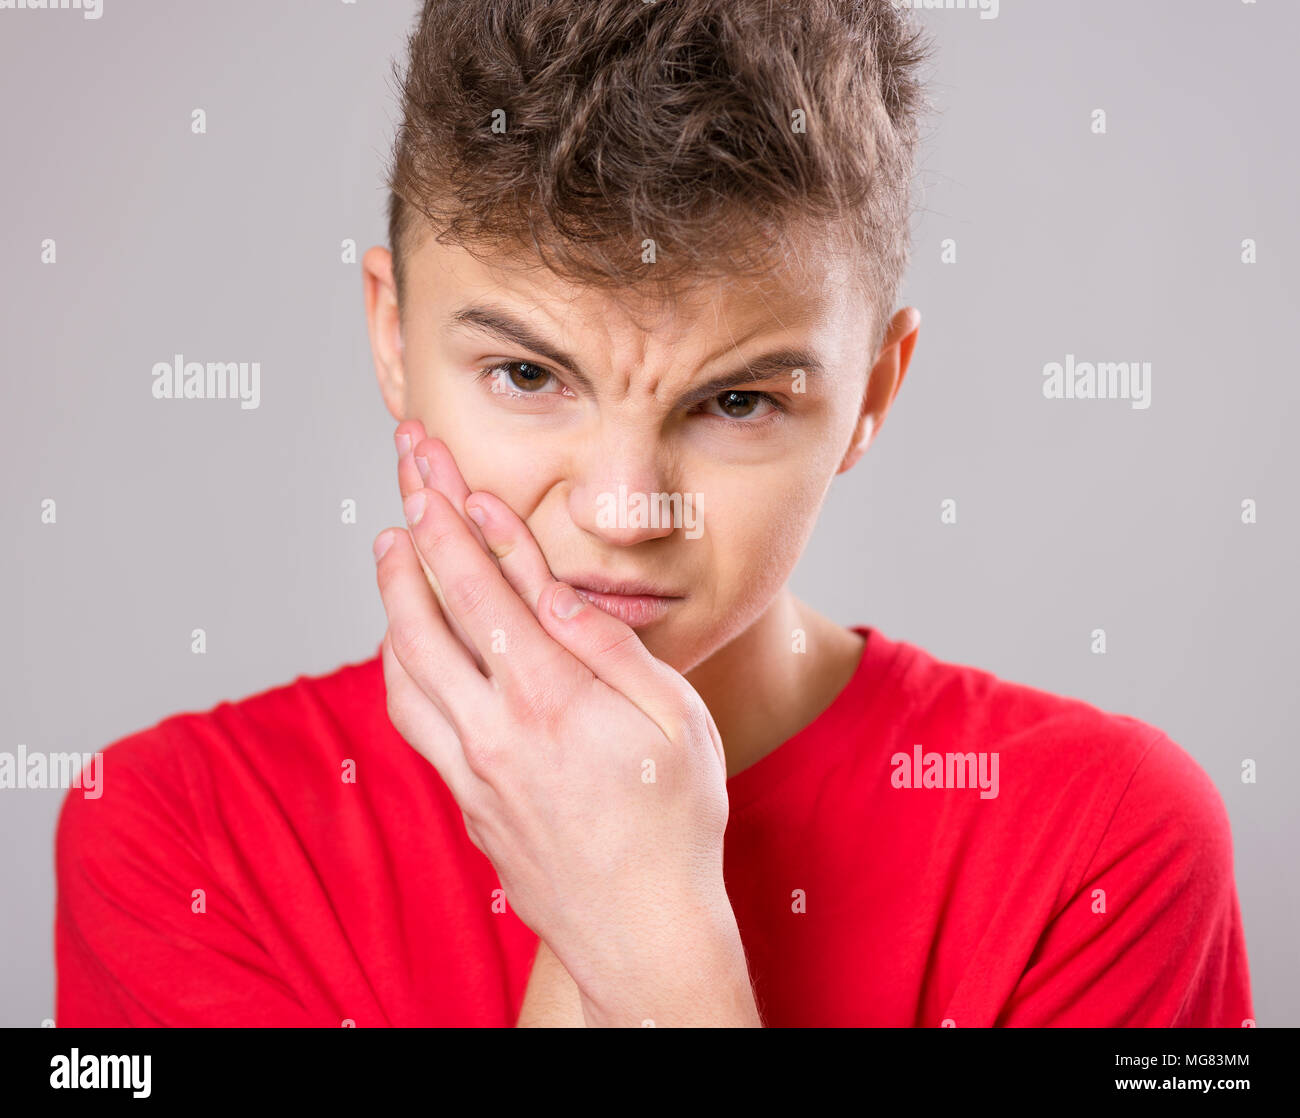 Casual guy have toothache, on gray background. Emotional portrait of teen boy wearing red t-shirt. Sad child with tooth pain. Dental problem - teenage Stock Photo